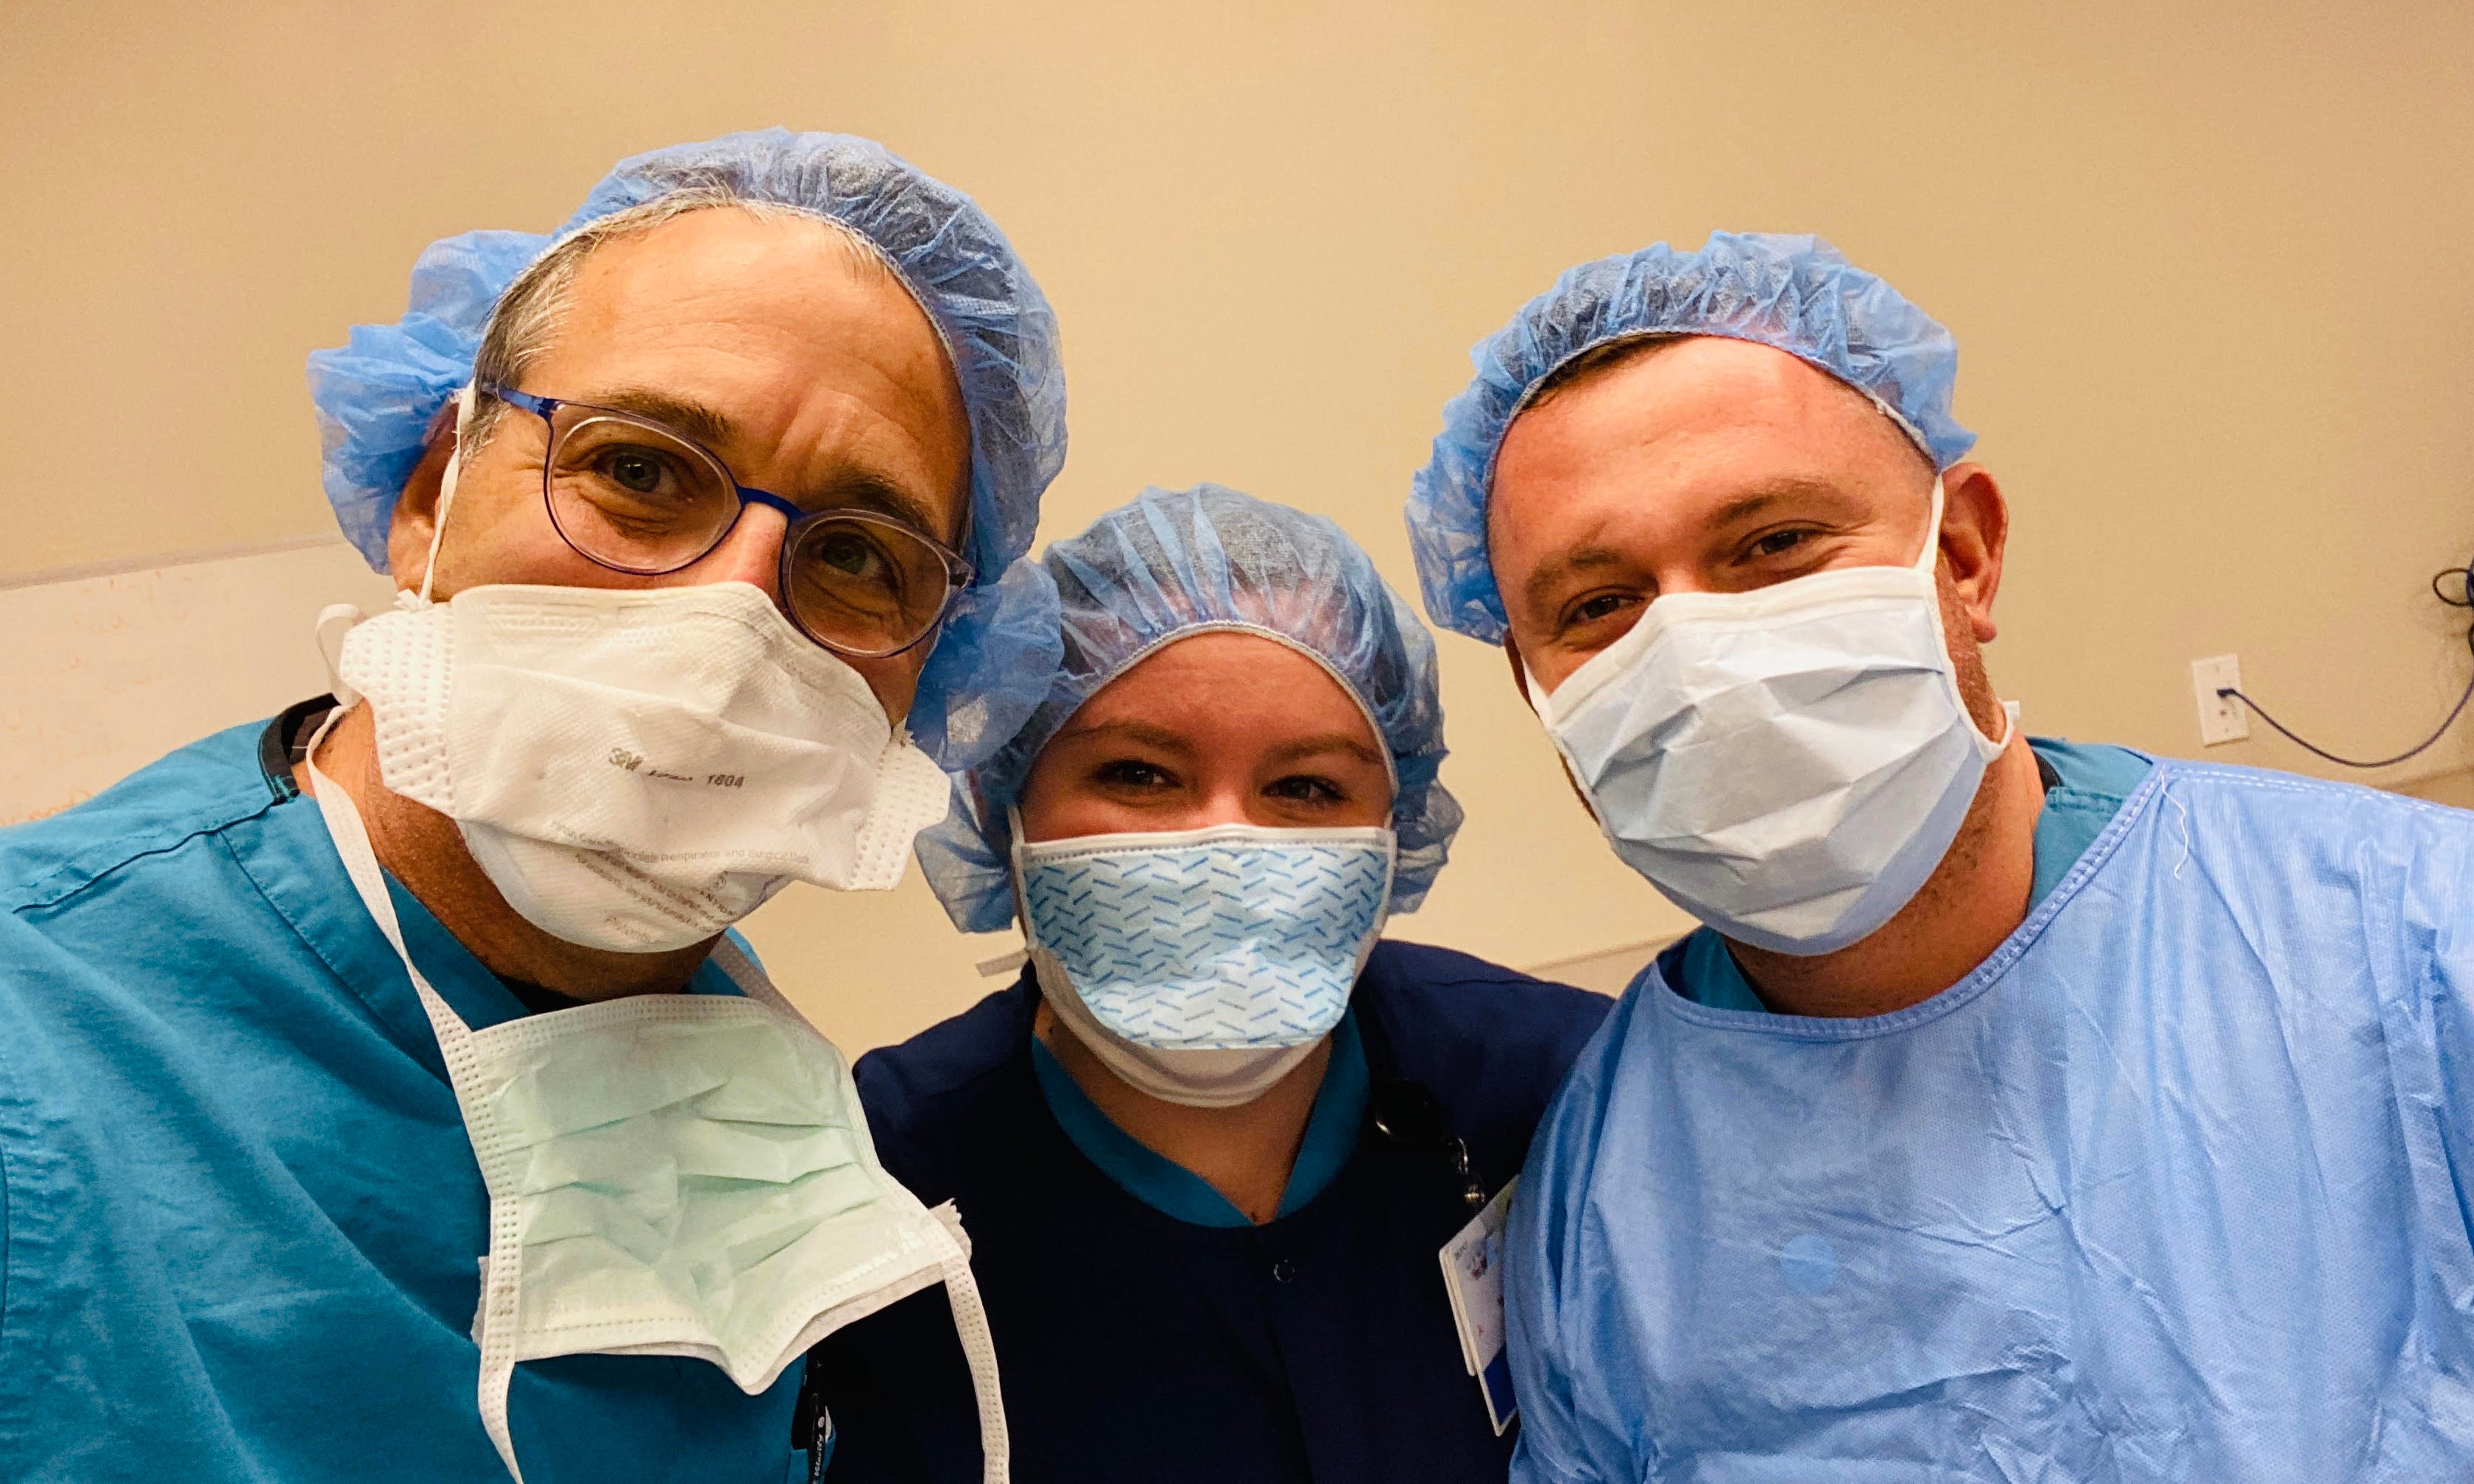 wearing masks in the operating room 2